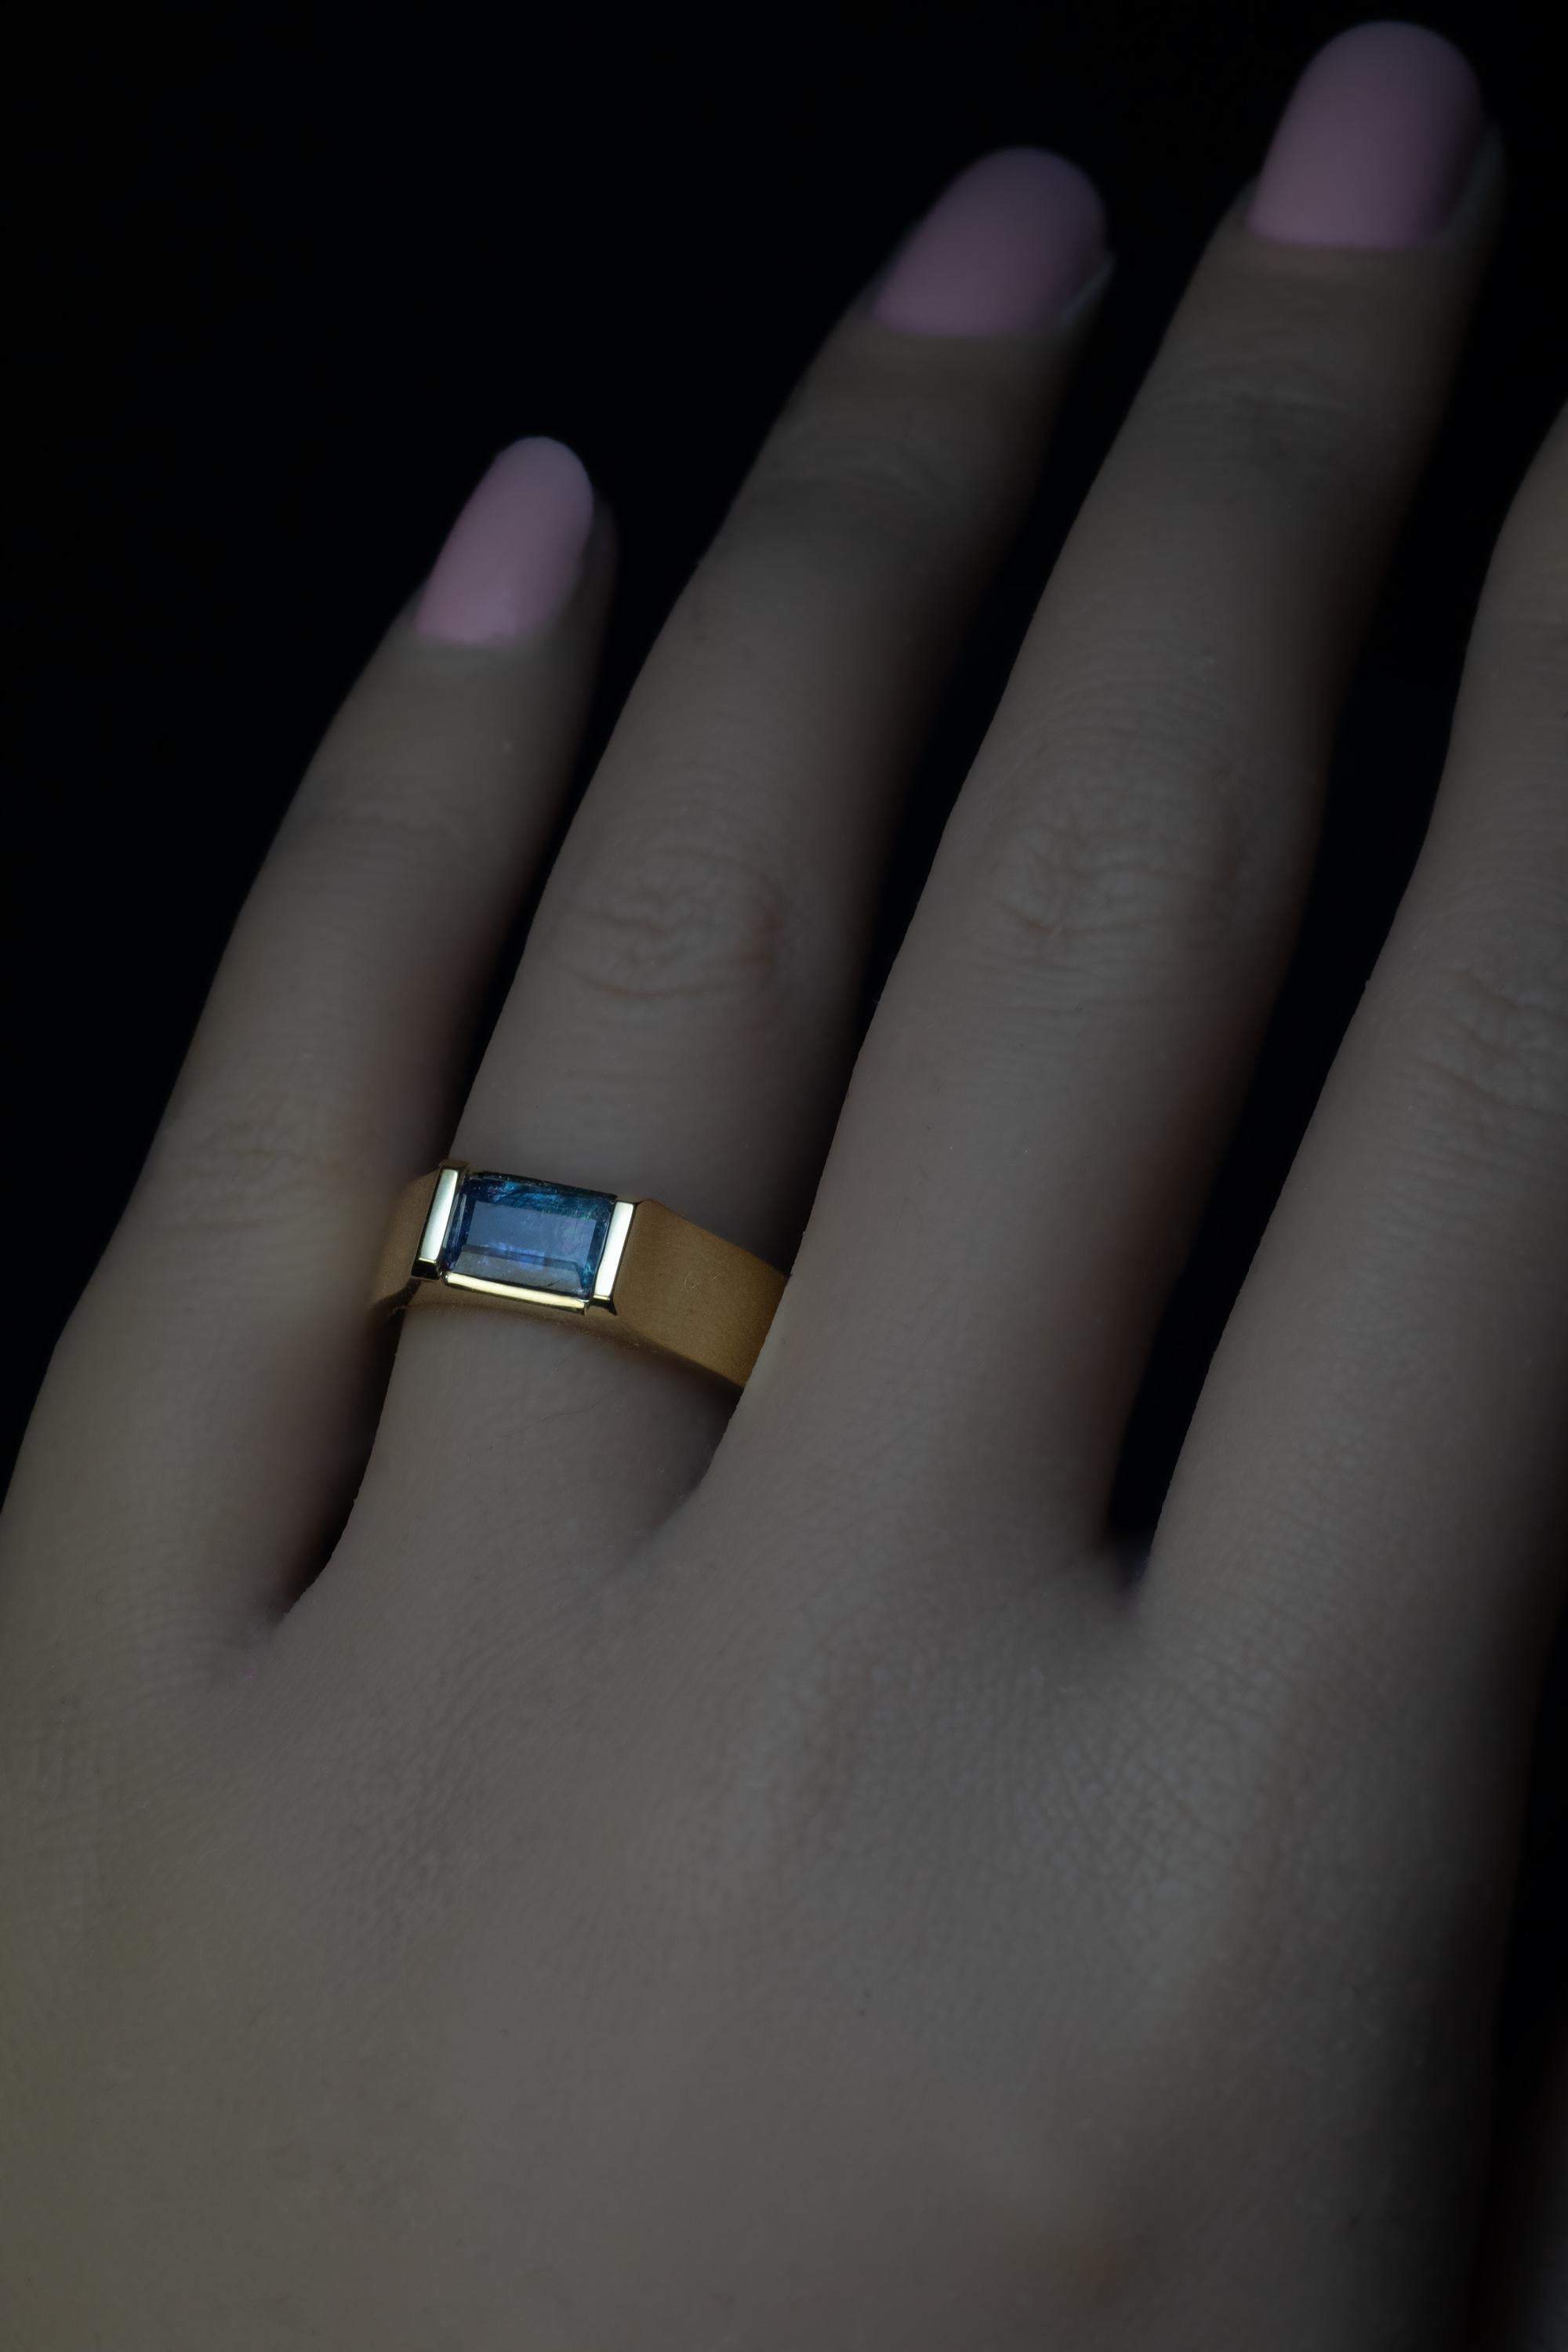 This contemporary custom-made 18K gold ring features a very rare 1.19 carat emerald cut Russian Alexandrite.
The Alexandrite changes its color from grayish bluish green (daylight) to dark purple pink (incandescent light) to grayish blue (mixed